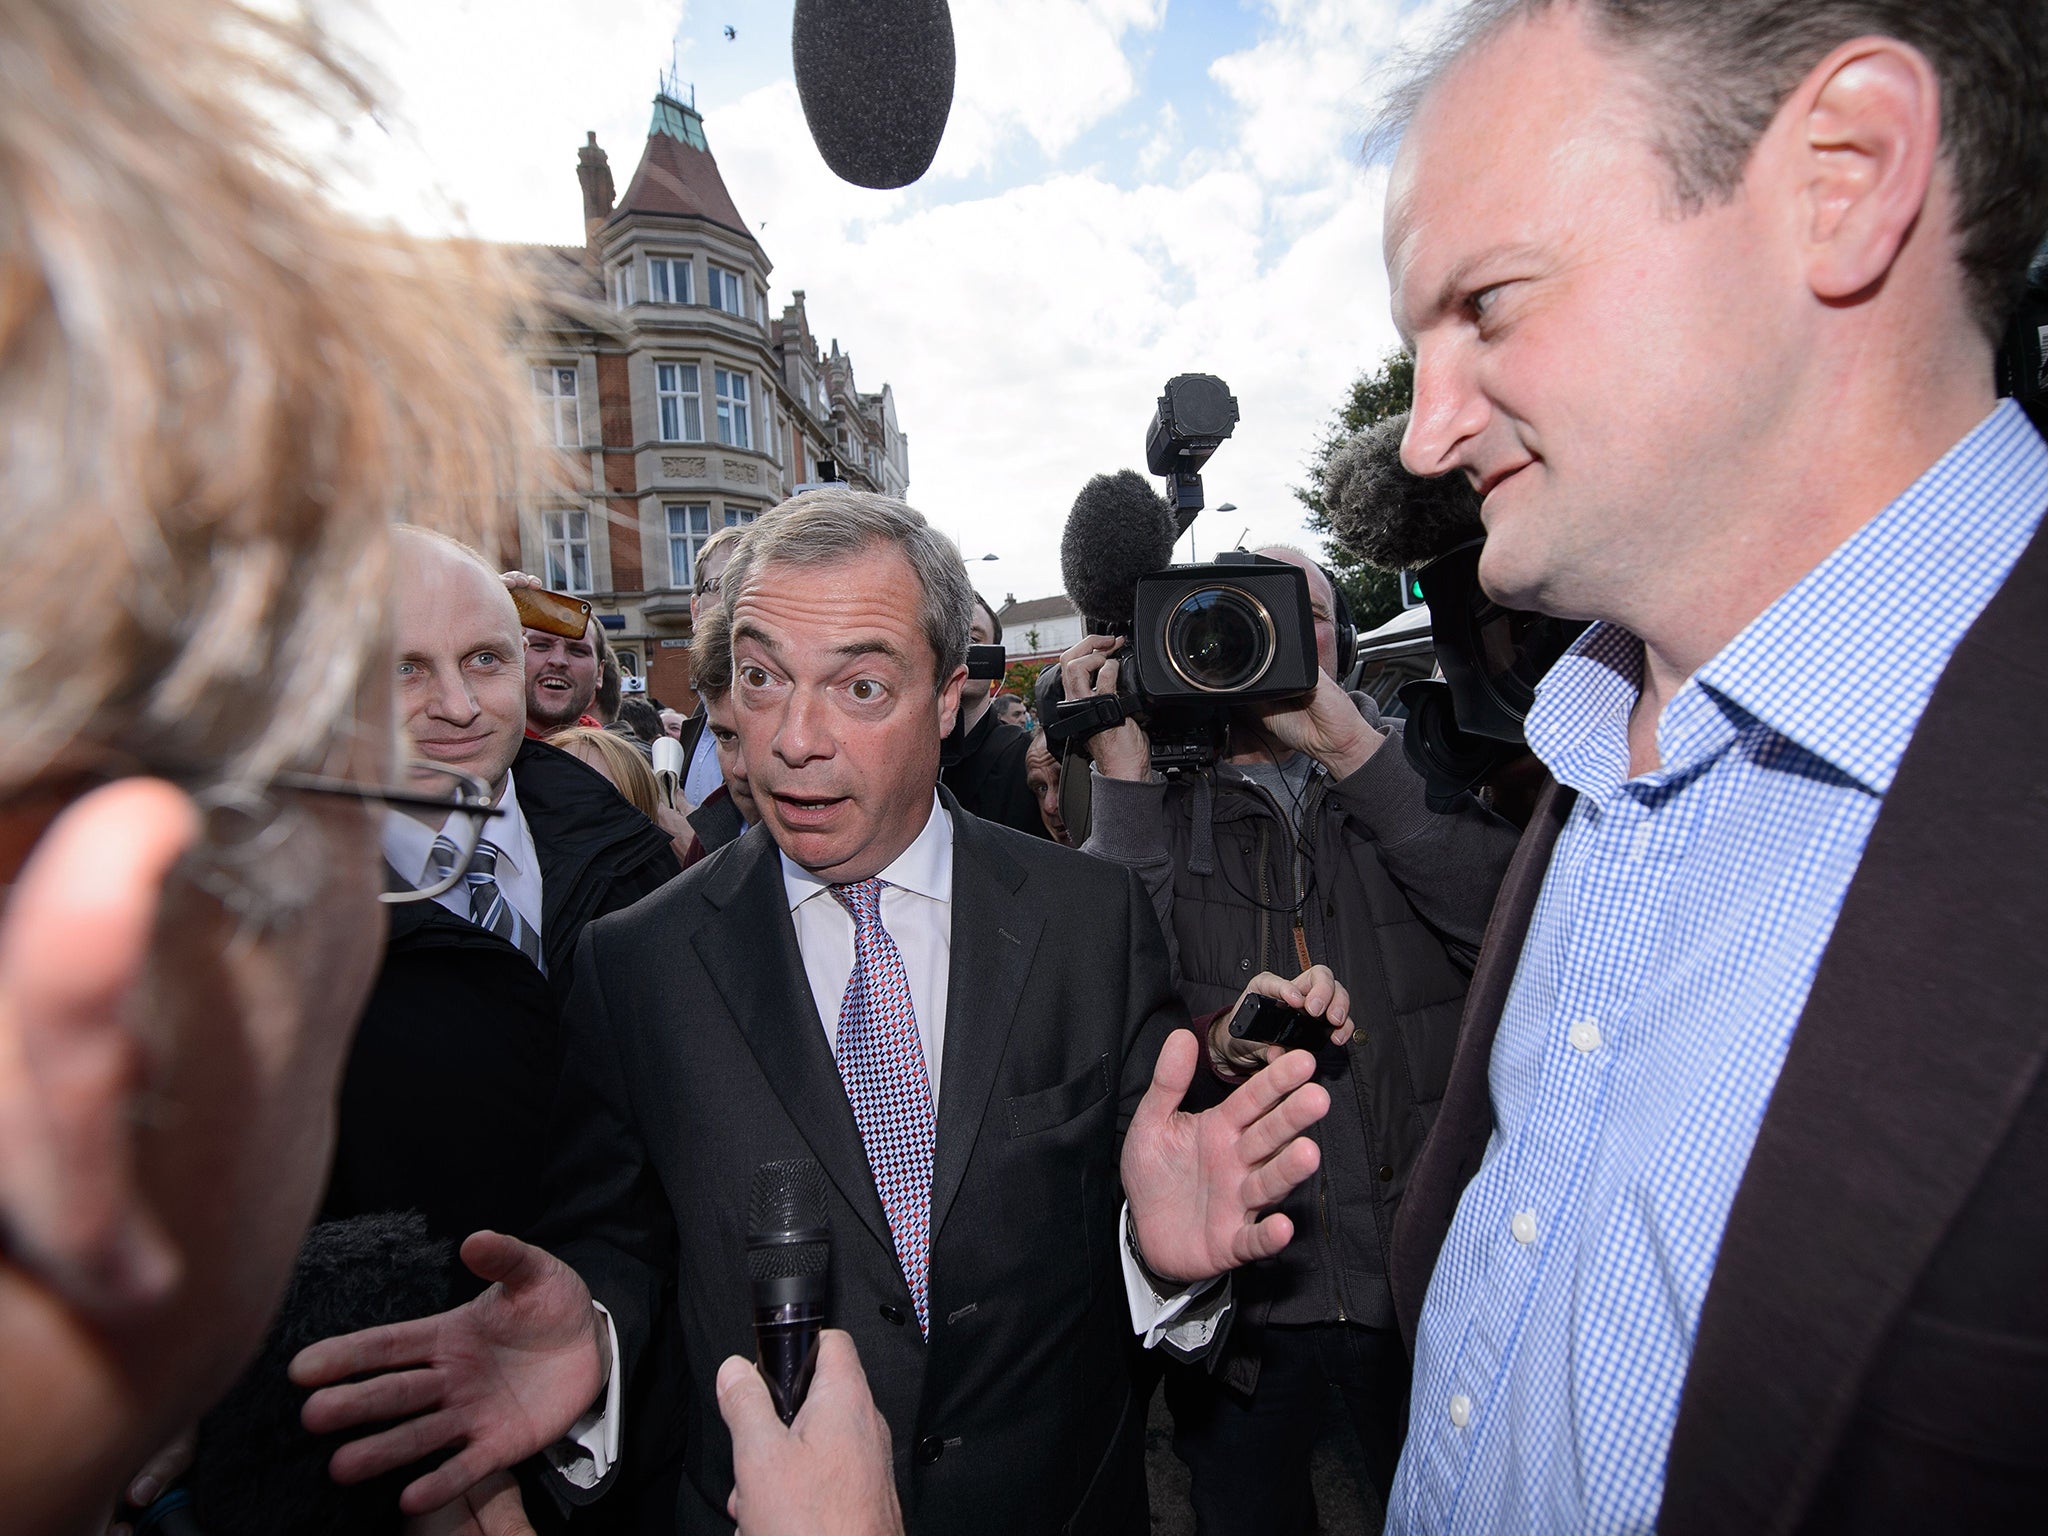 Ukip leader Nigel Farage with newly elected Ukip MP Douglas Carswell (right) after the party’s win in Clacton